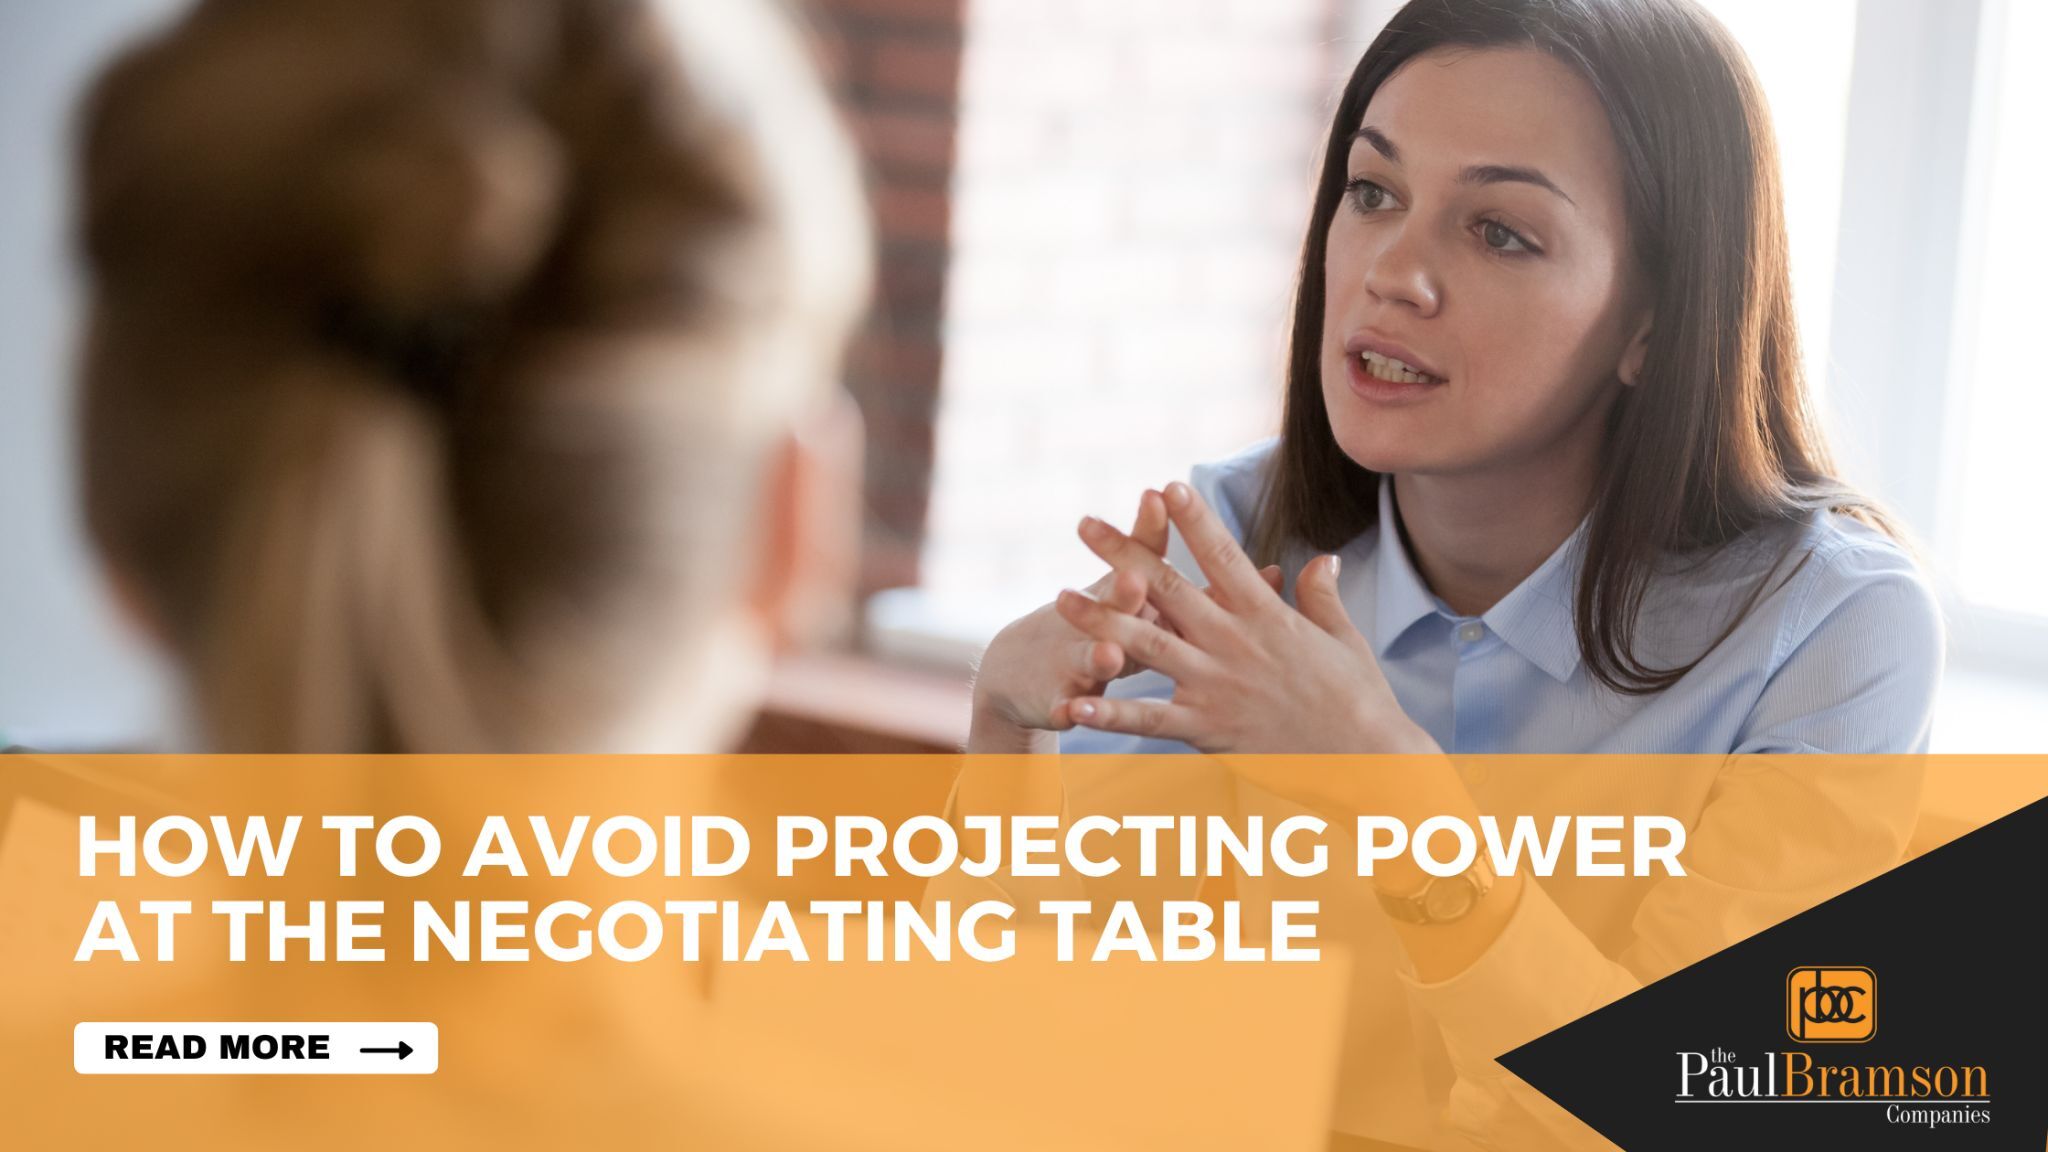 How to Avoid Projecting Power at the Negotiation Table